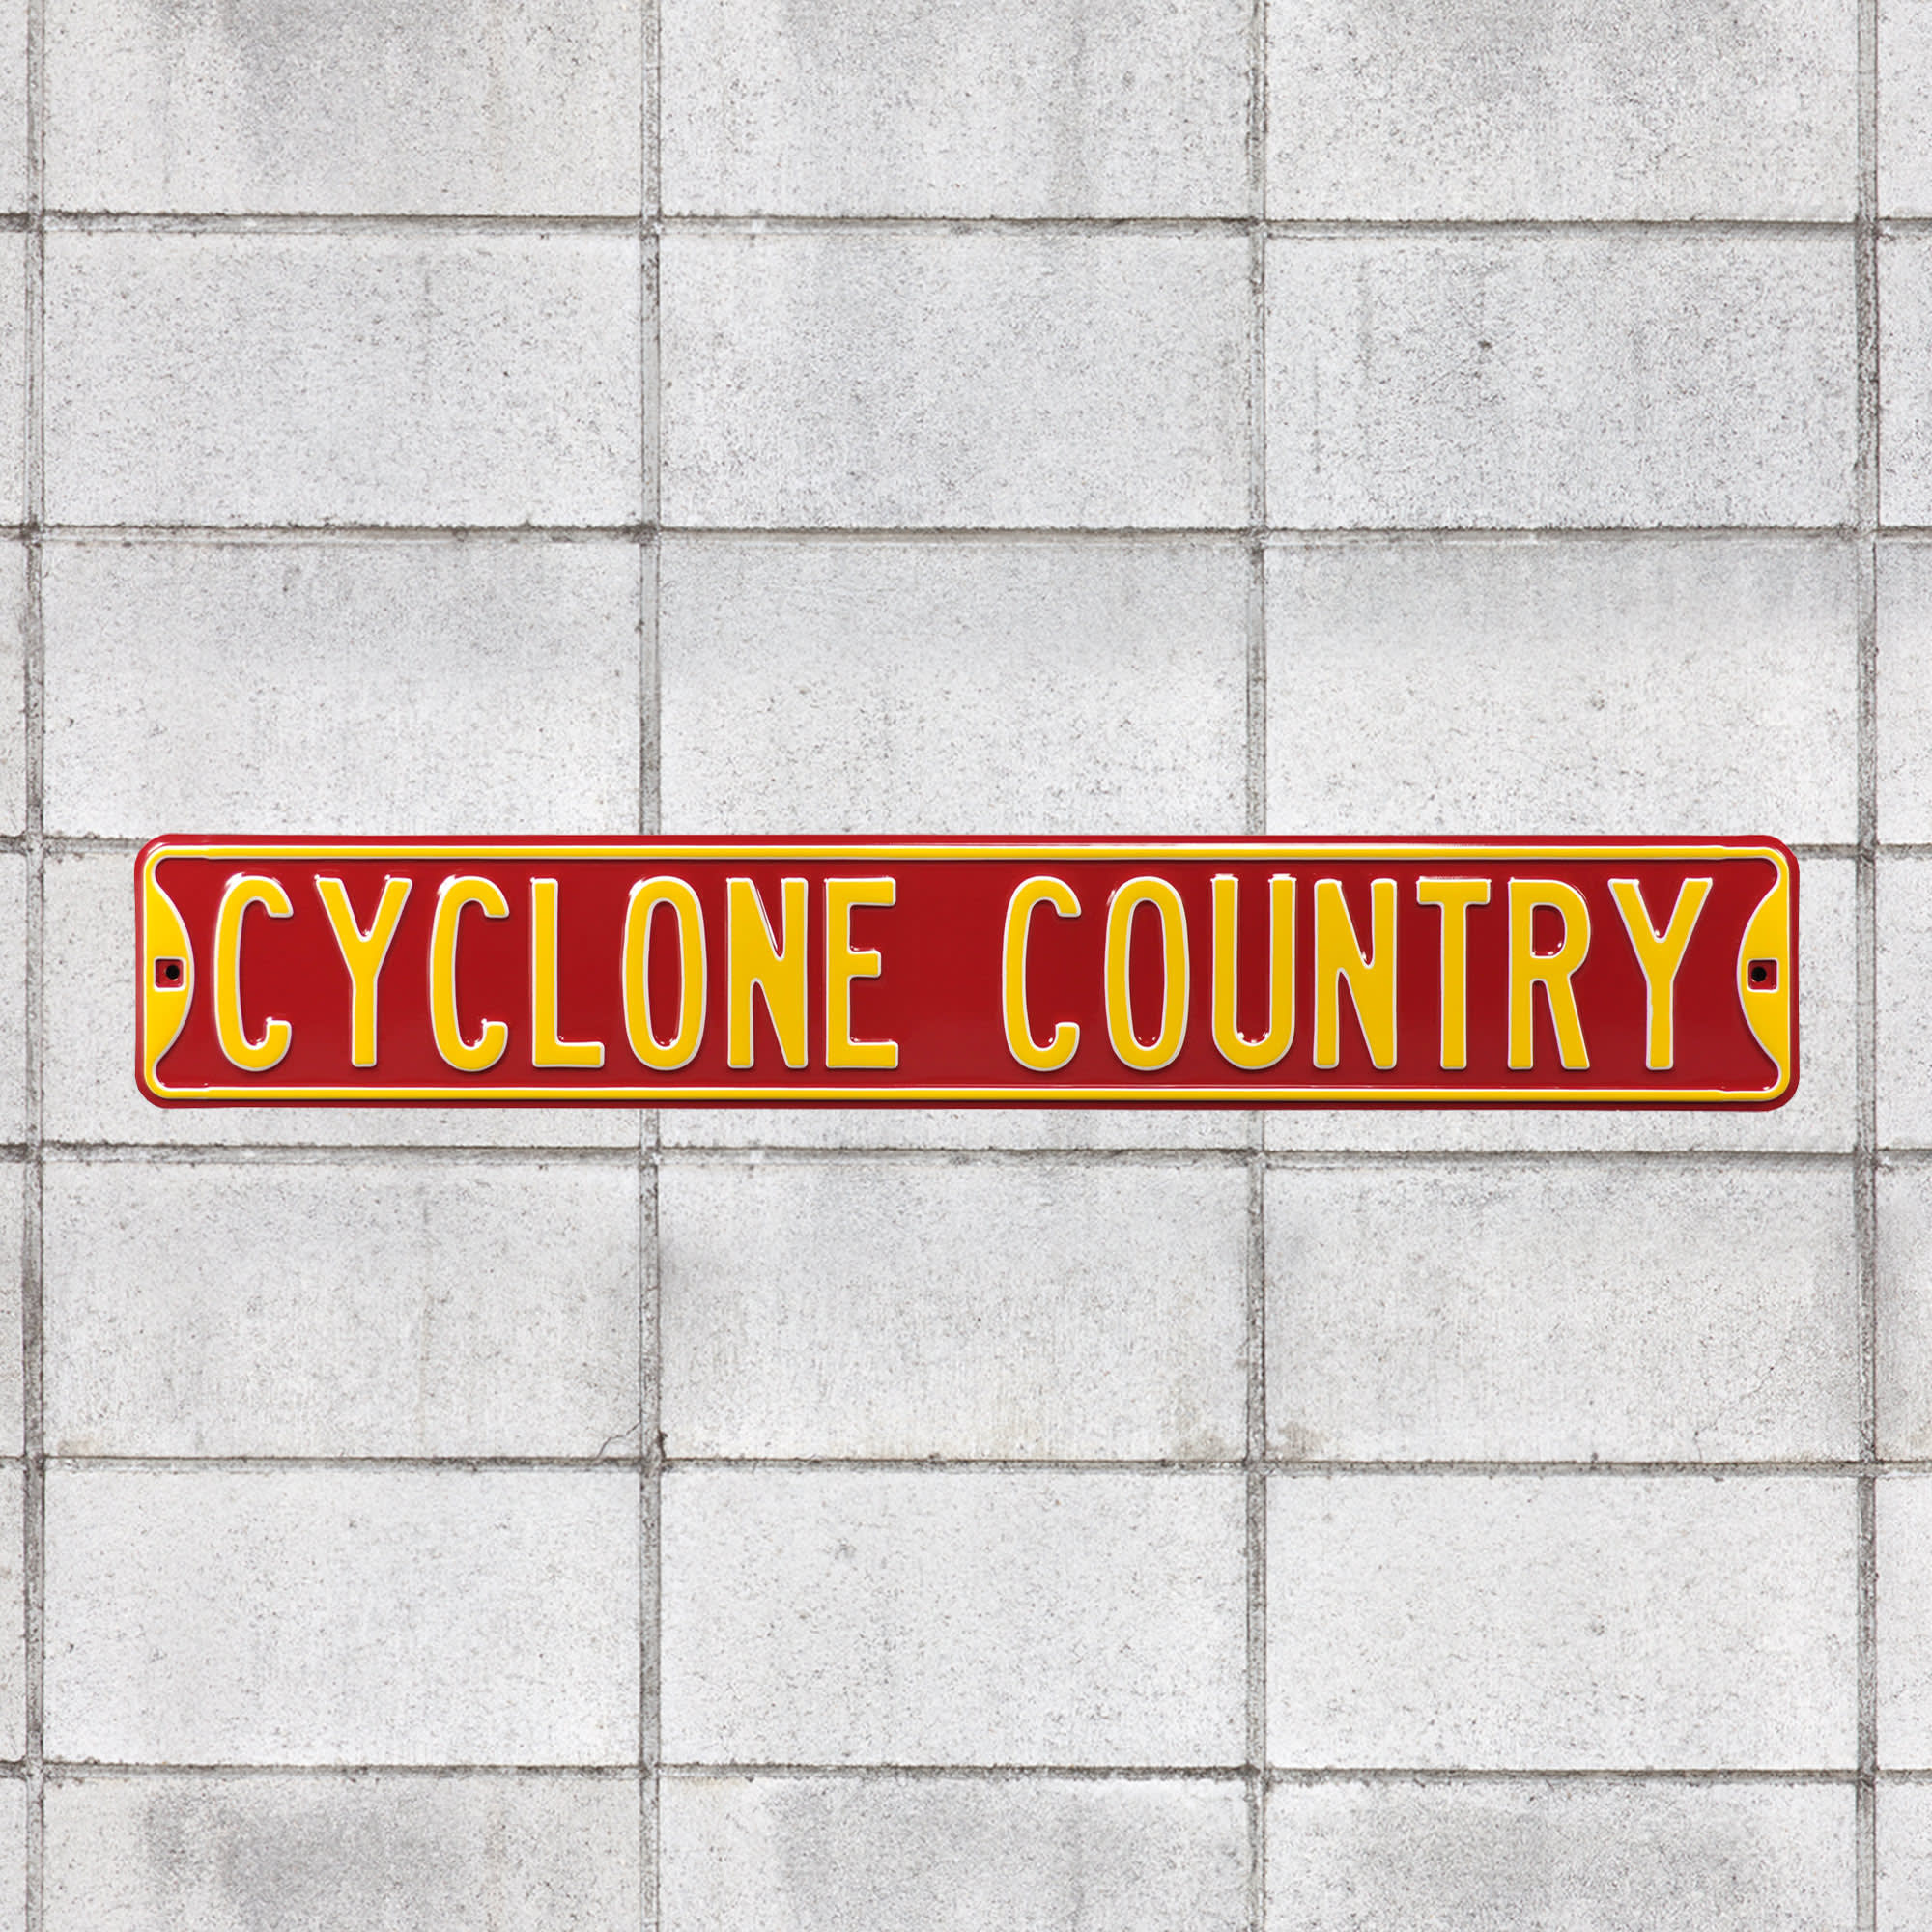 Iowa Hawkeyes: Cyclone Country - Officially Licensed Metal Street Sign 36.0"W x 6.0"H by Fathead | 100% Steel